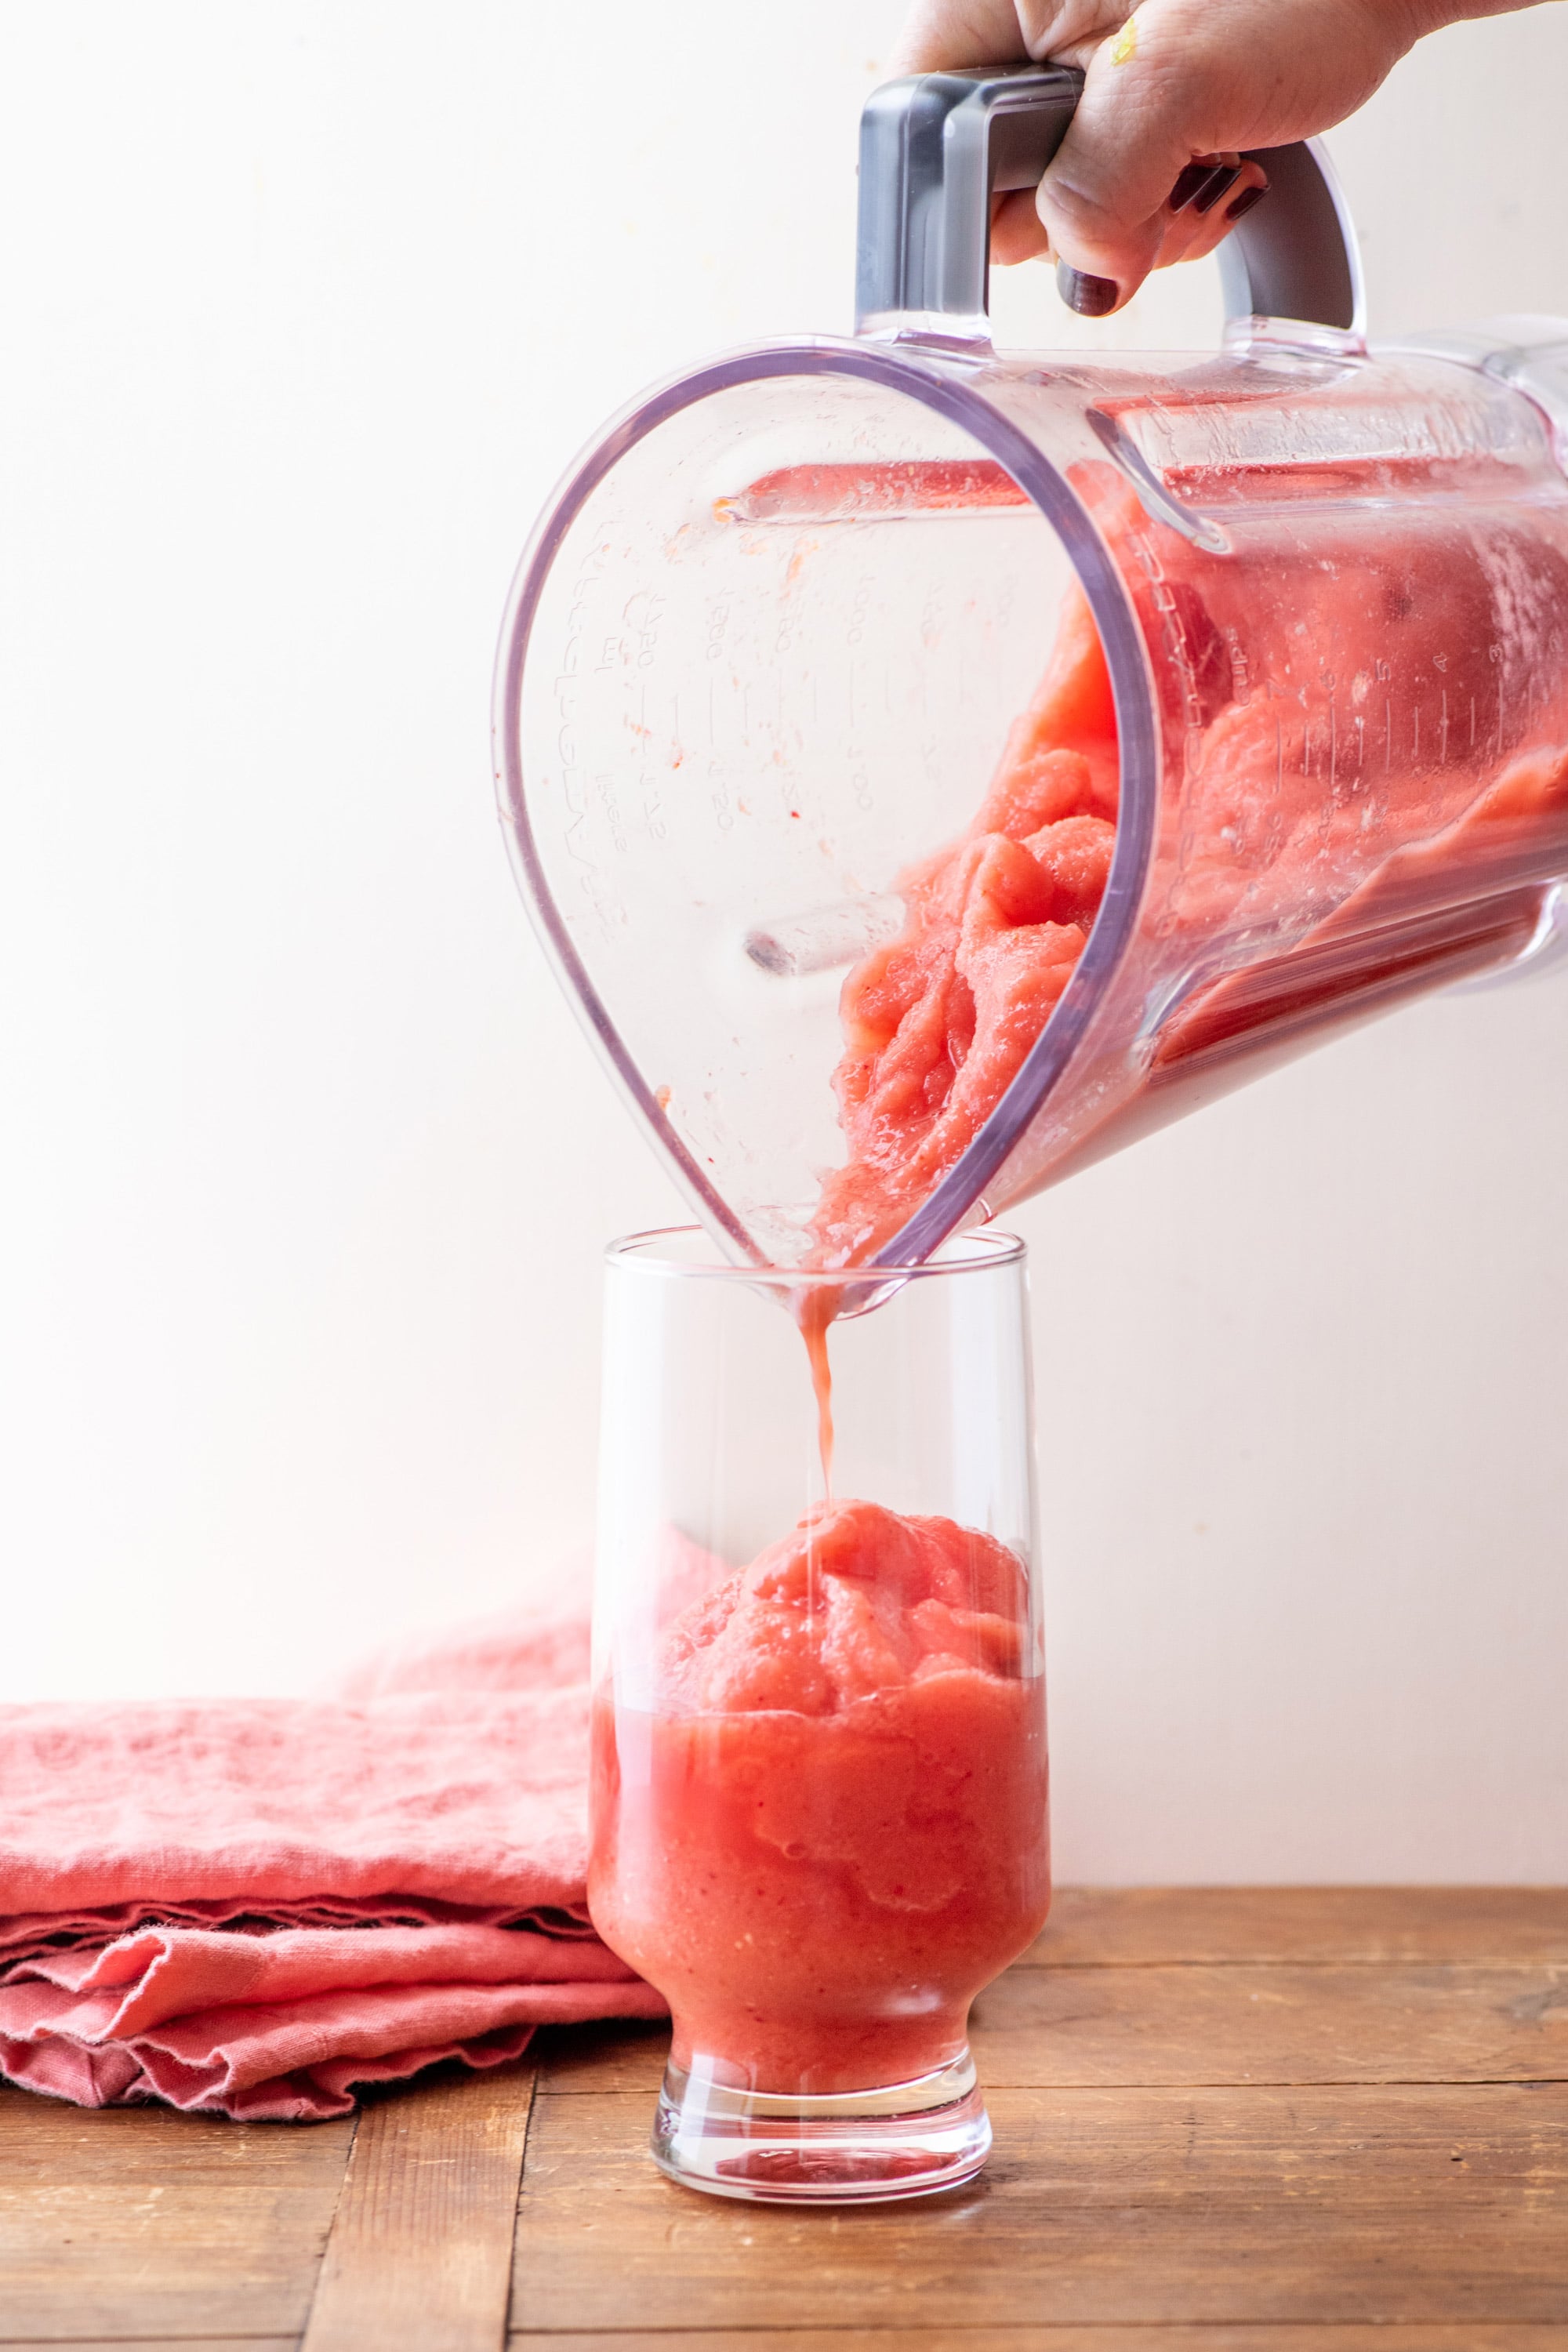 Blender pouring Watermelon Strawberry Smoothie into a glass.